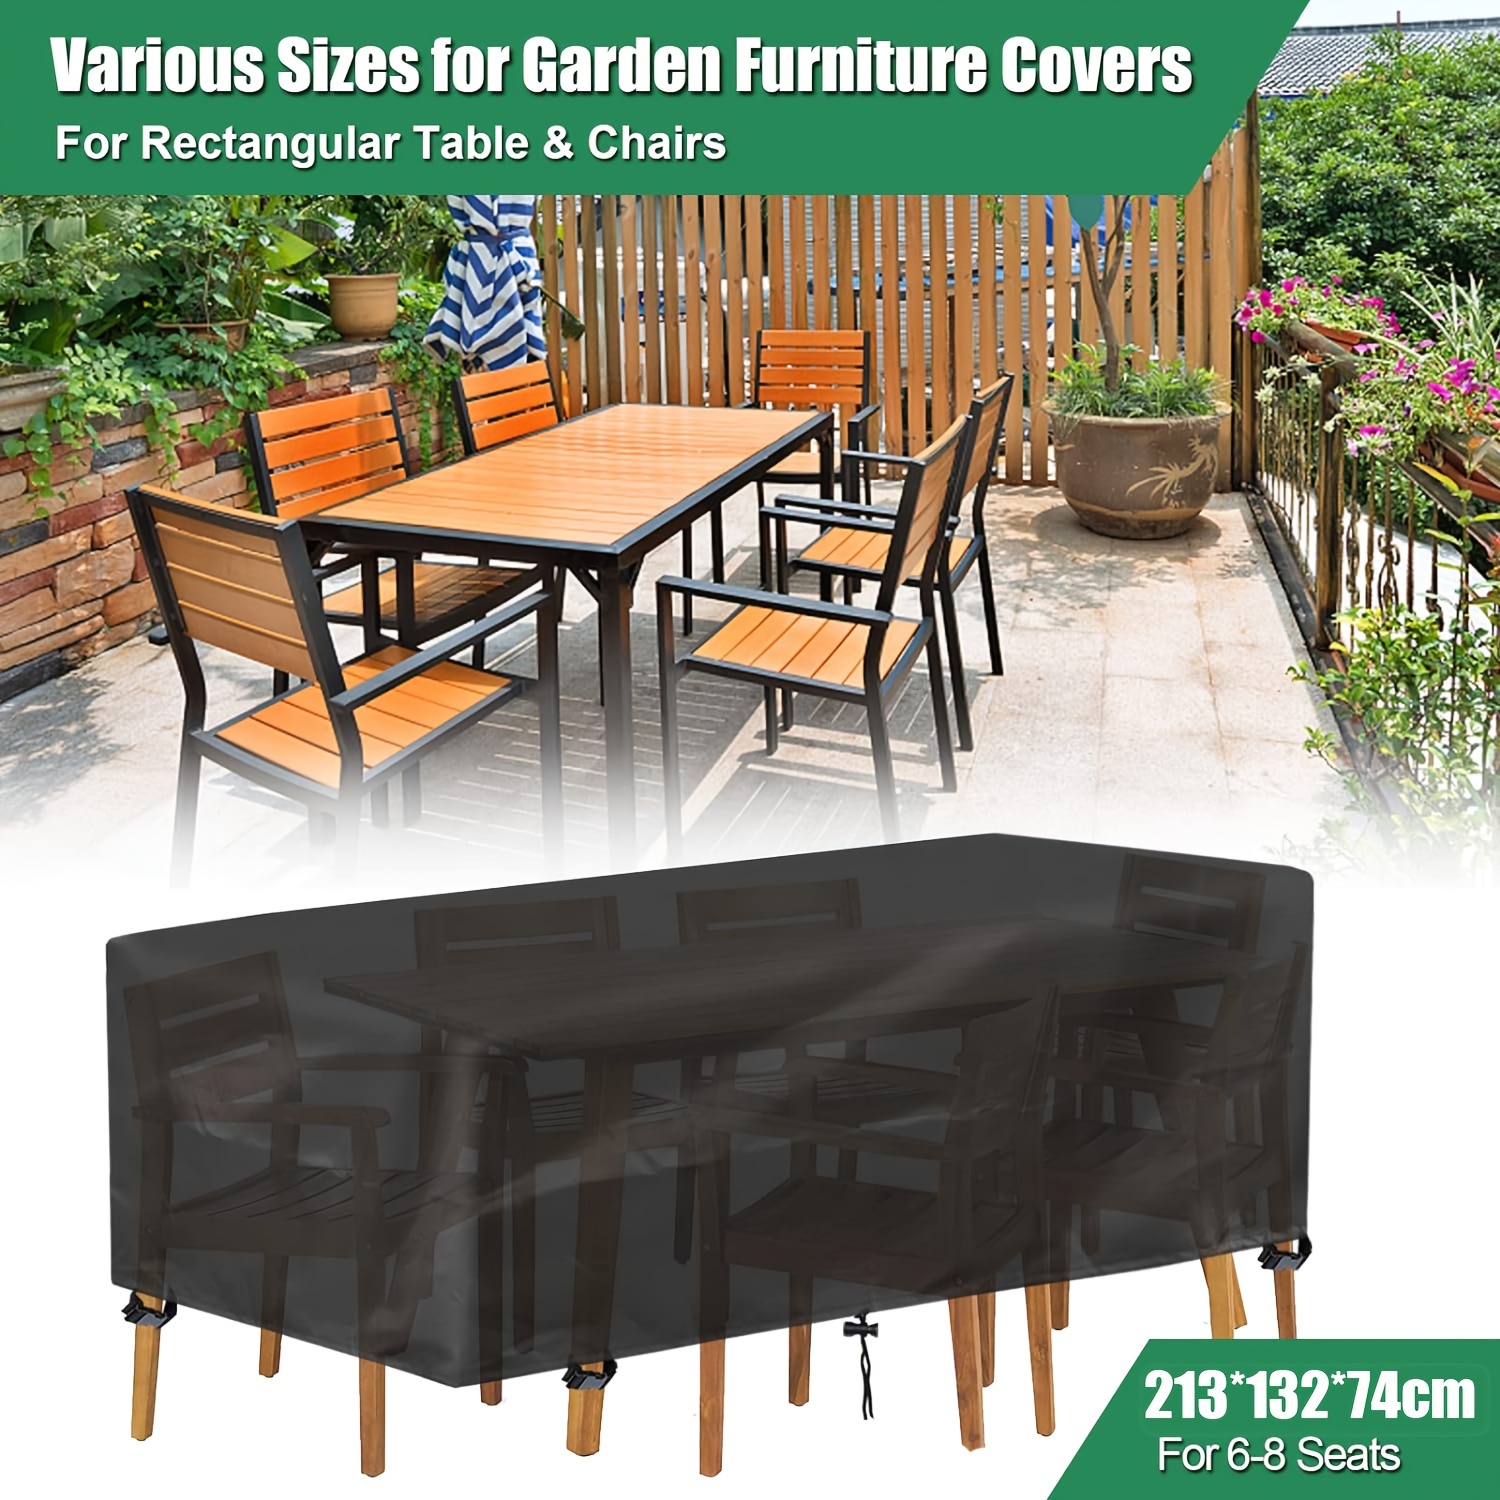 

Rectangular Garden Furniture Covers: Waterproof 213x132x74cm - Suitable For 6-8 Seats - Protects From Rain And Sun - Made Of Durable Polyester